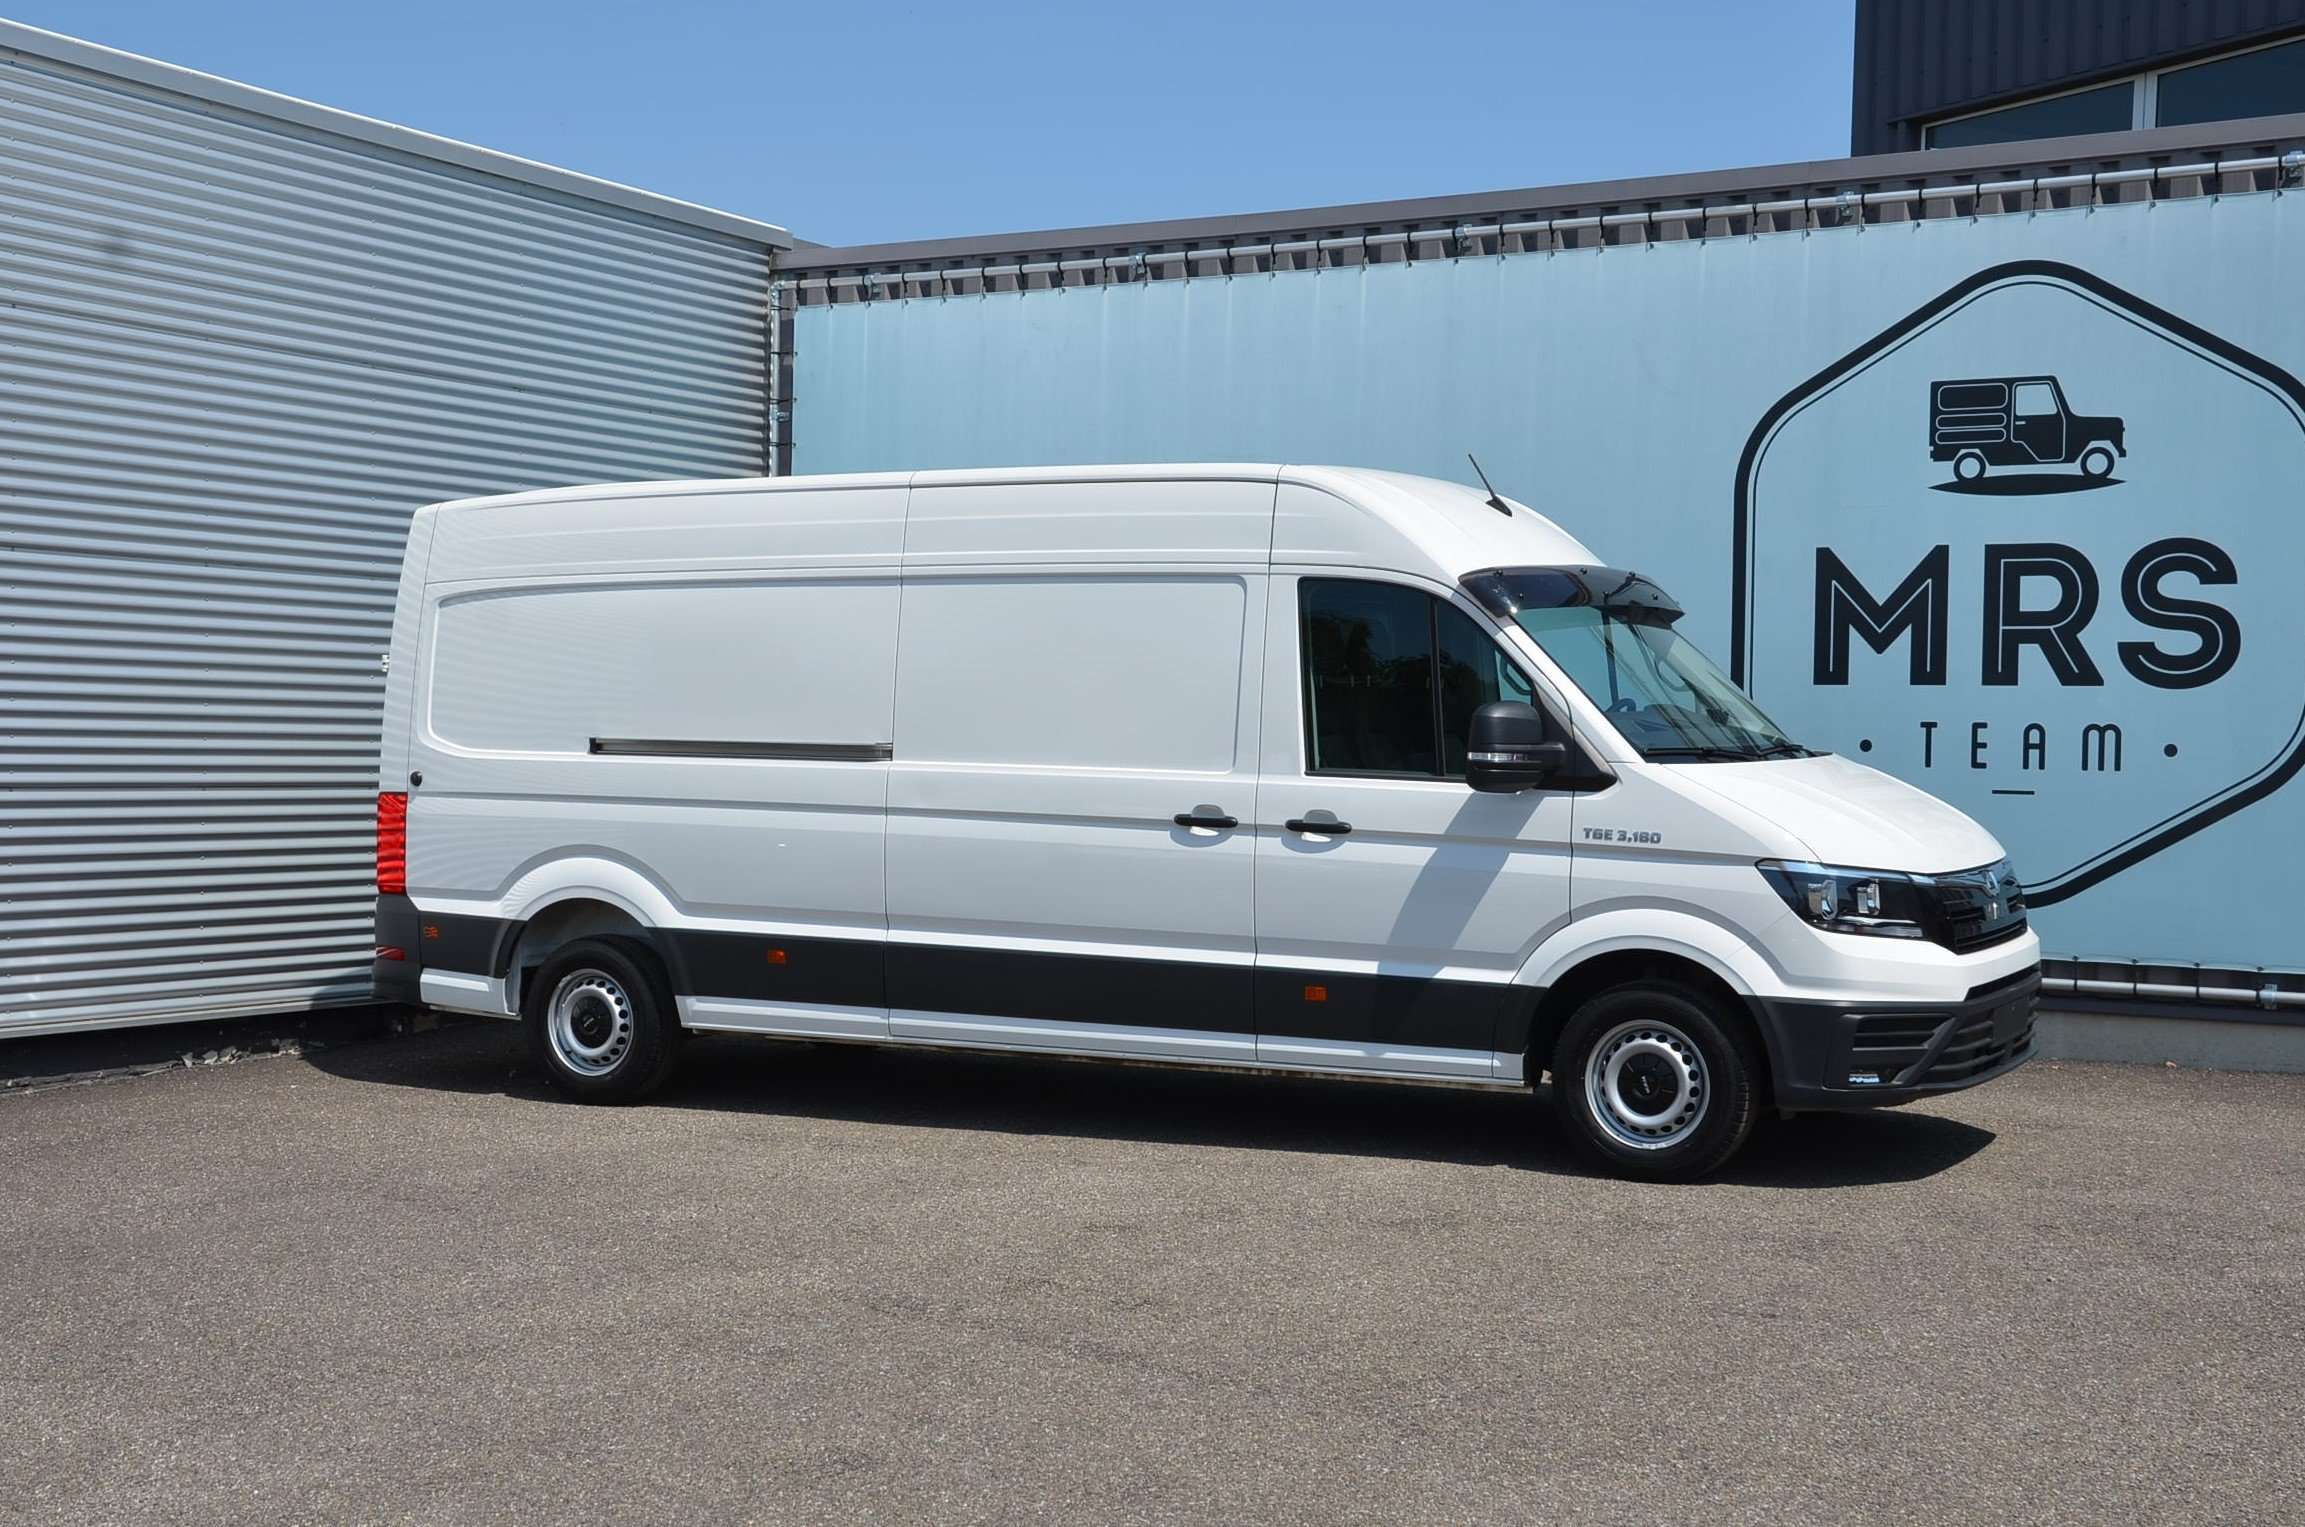 MAN TGE Transporter in White used in Houthalen for € 47,916.-